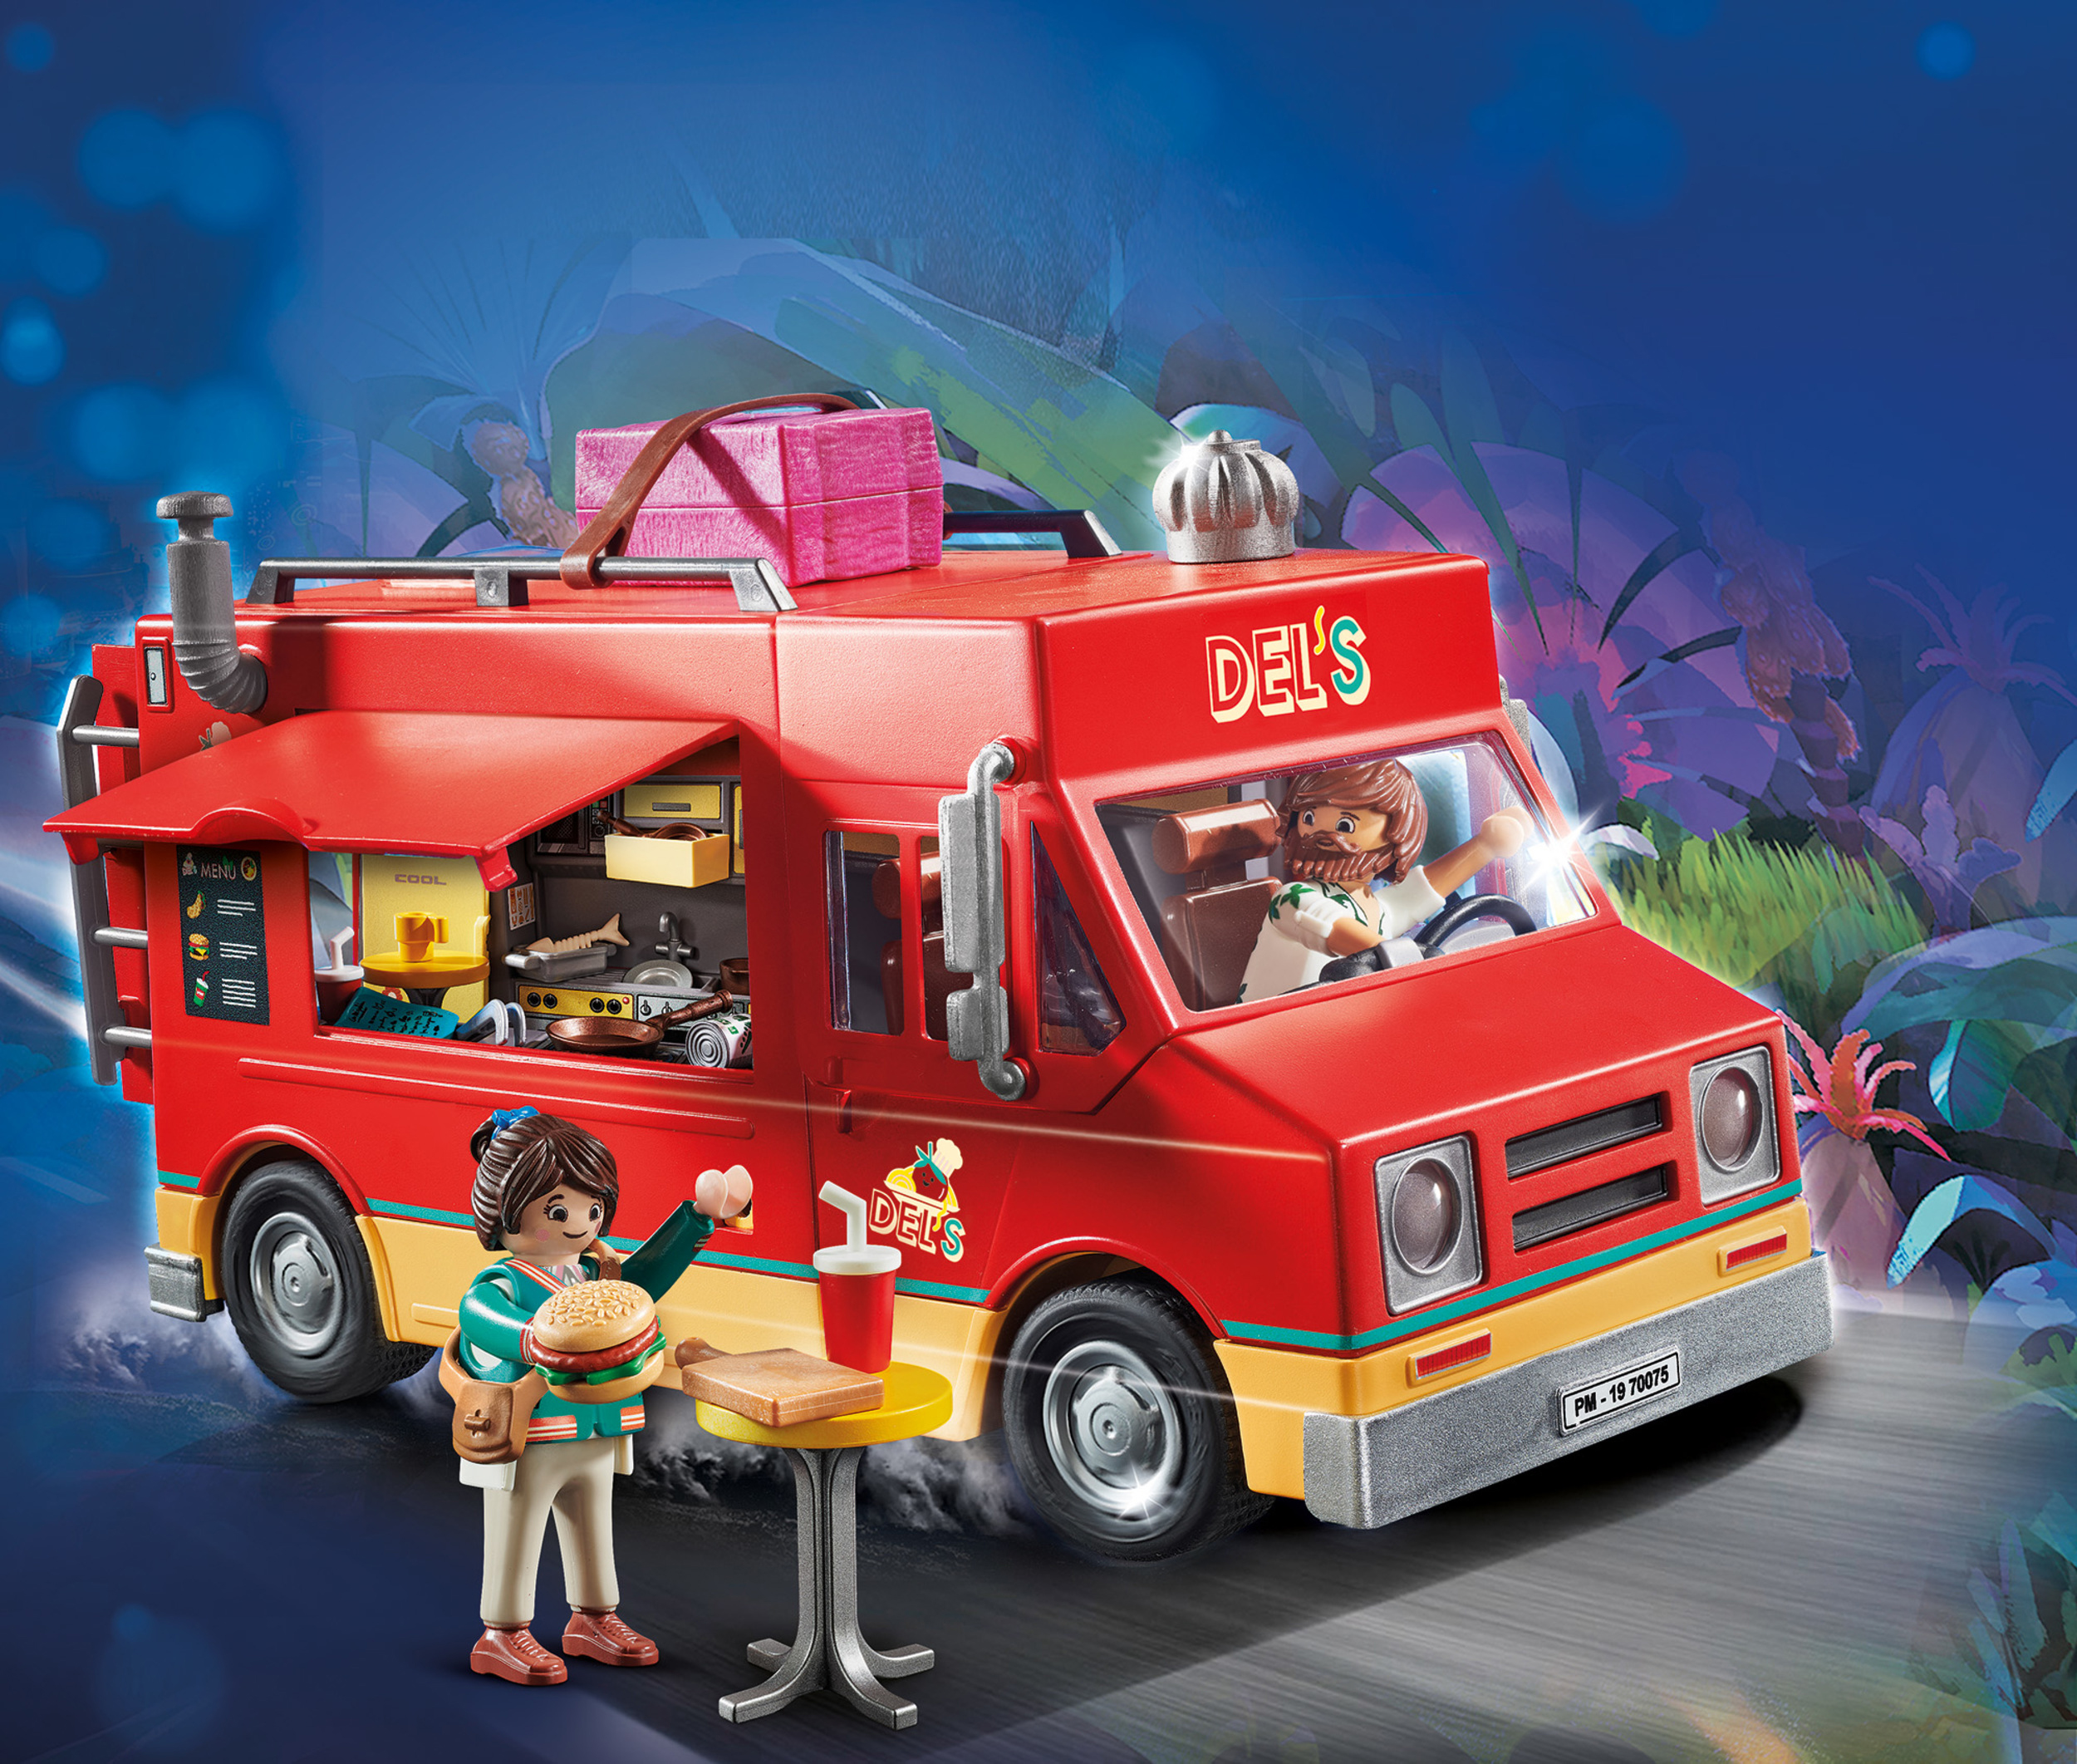 PLAYMOBIL THE MOVIE Del's Food Truck - image 3 of 6